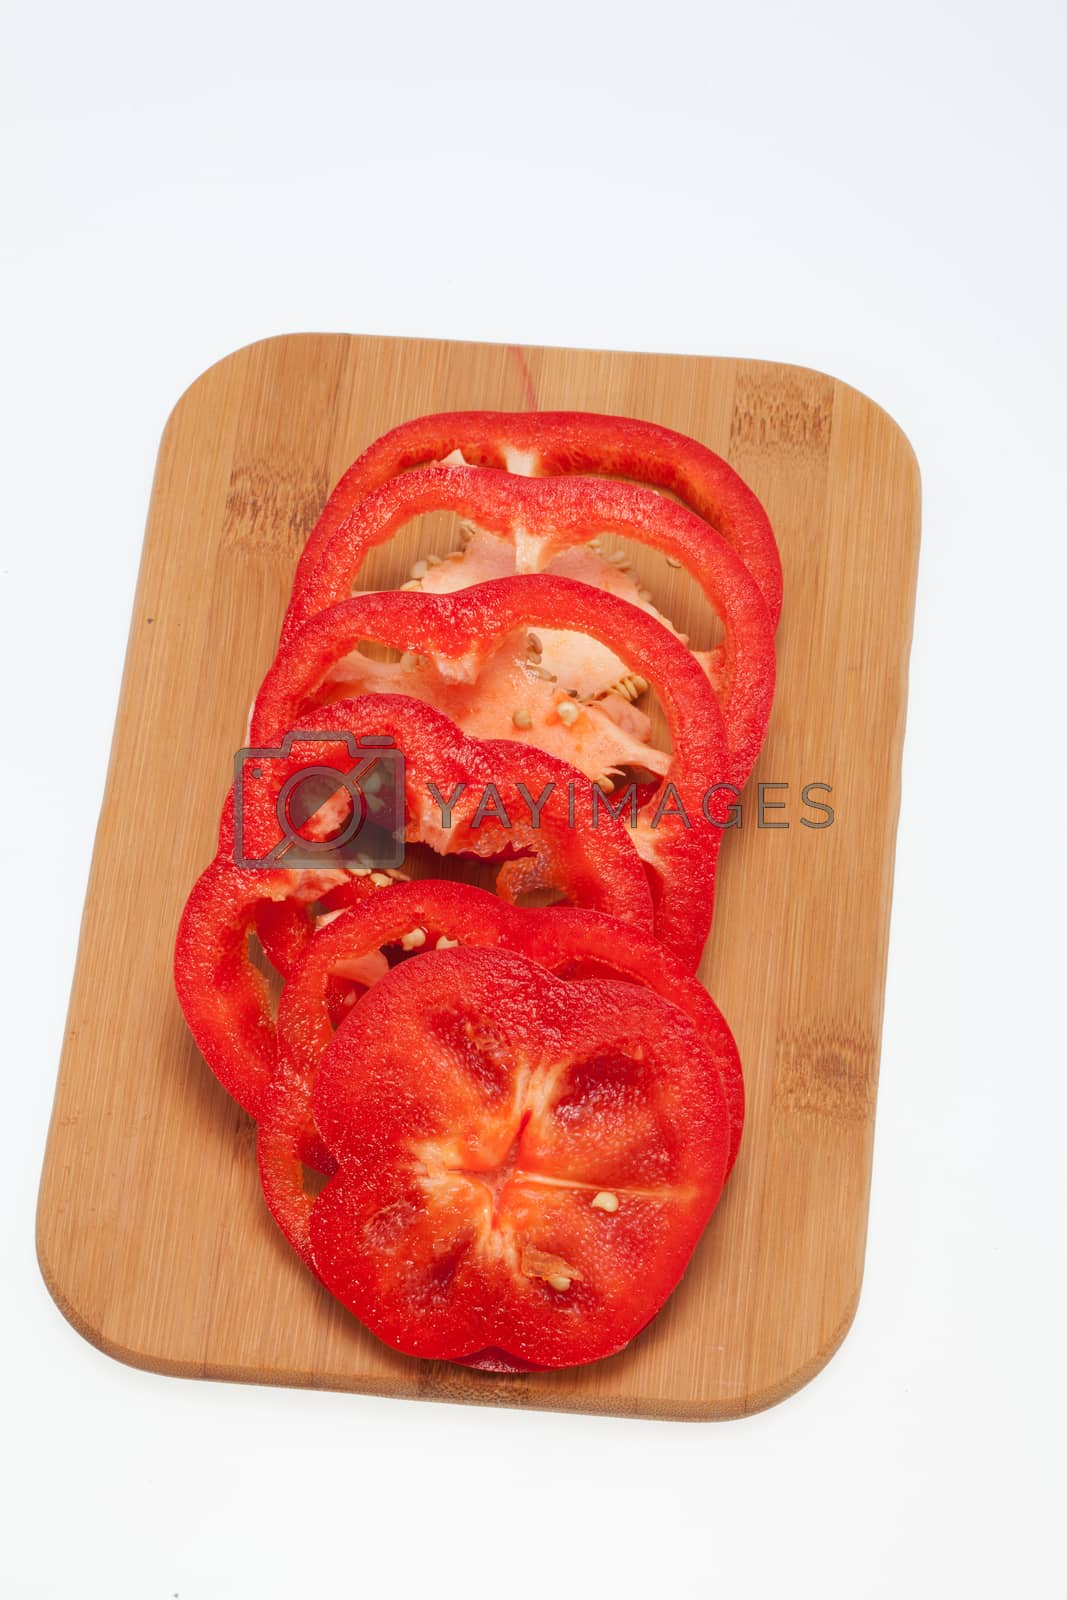 Royalty free image of Sliced red pepper isolated on white background by wjarek